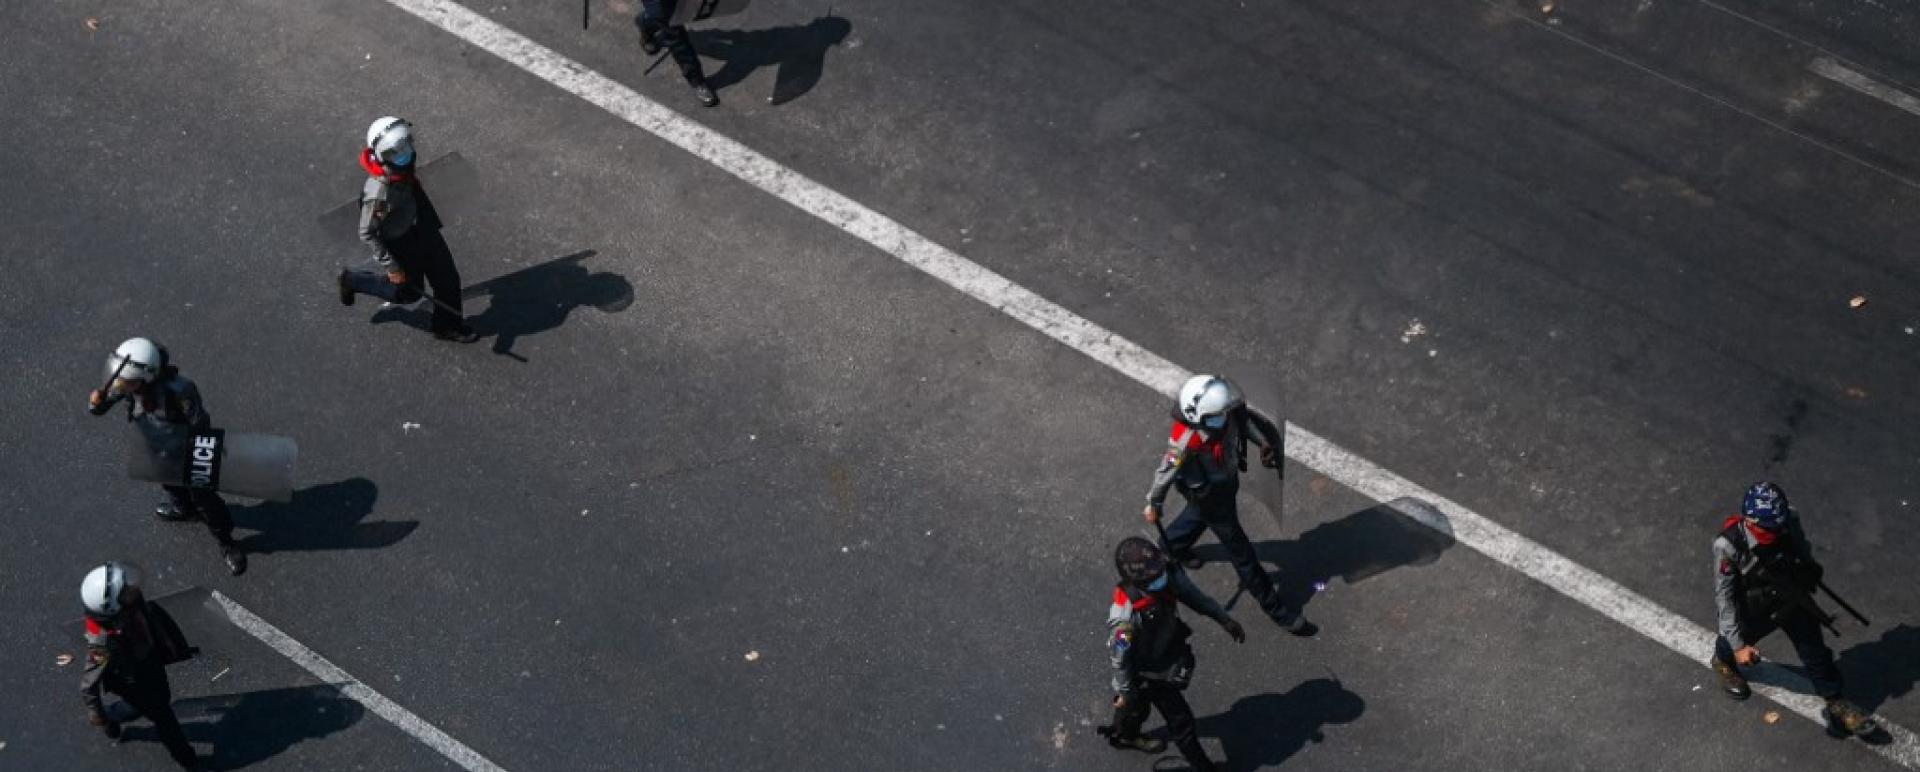 Police walk on a street in Yangon on February 28, 2021, as security forces continue to crackdown on demonstrations by protesters against the military coup. (Agence France Presse/Ye Aung Thu)